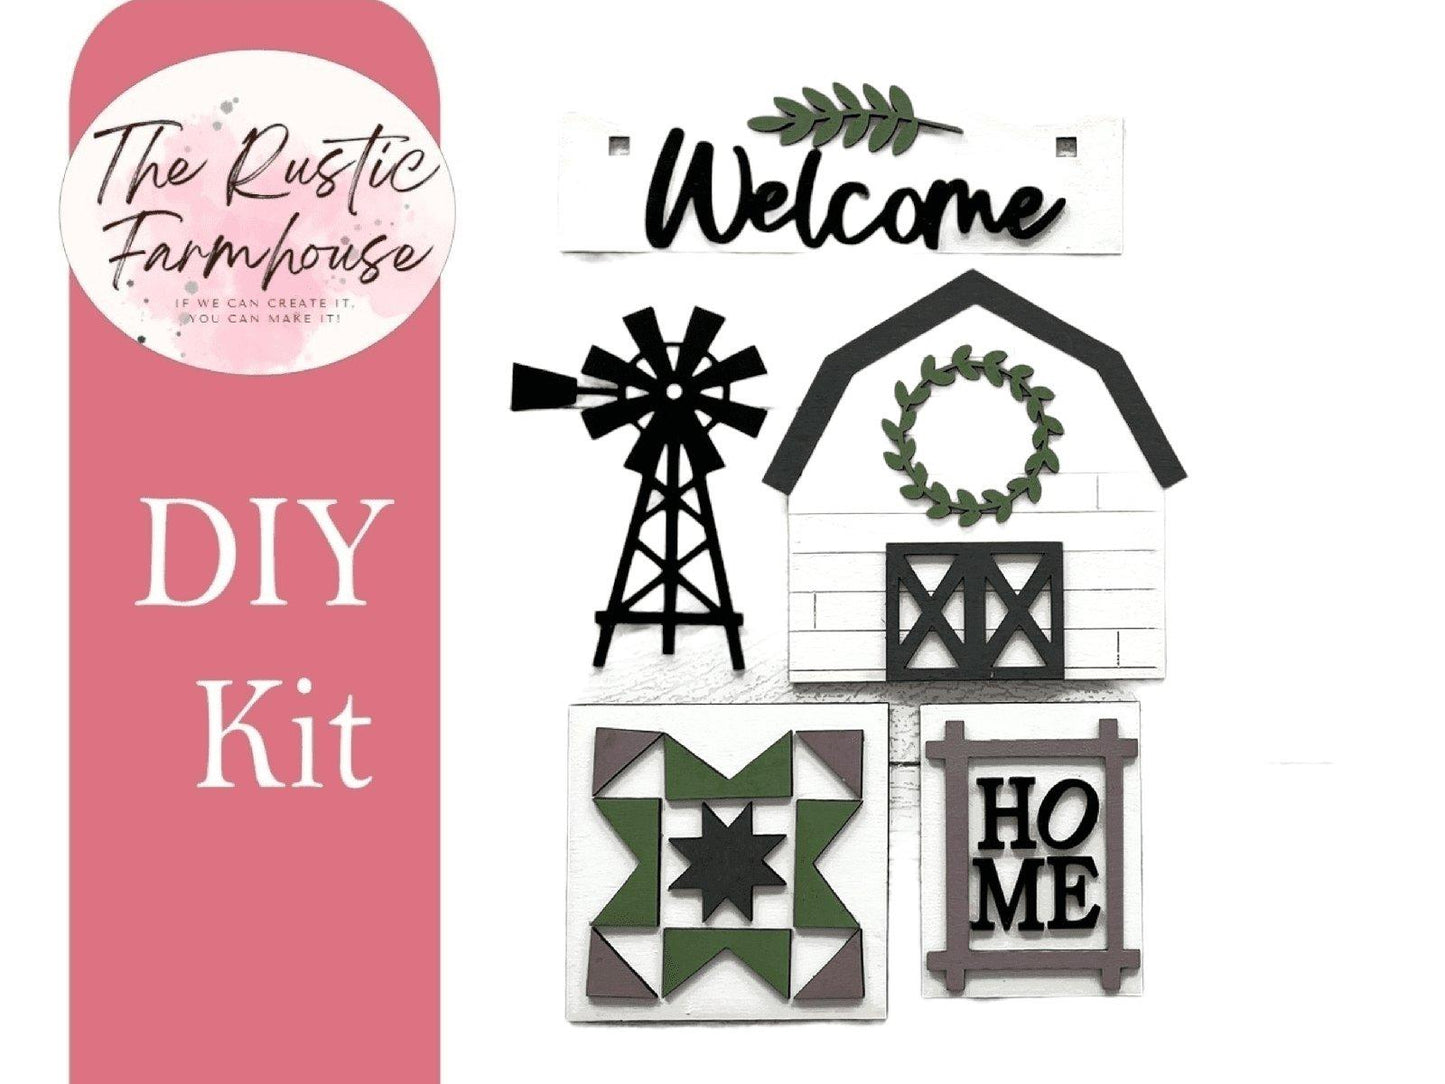 Welcome Farmhouse Interchangeable Inserts for our Window or House DIY Kit - RusticFarmhouseDecor